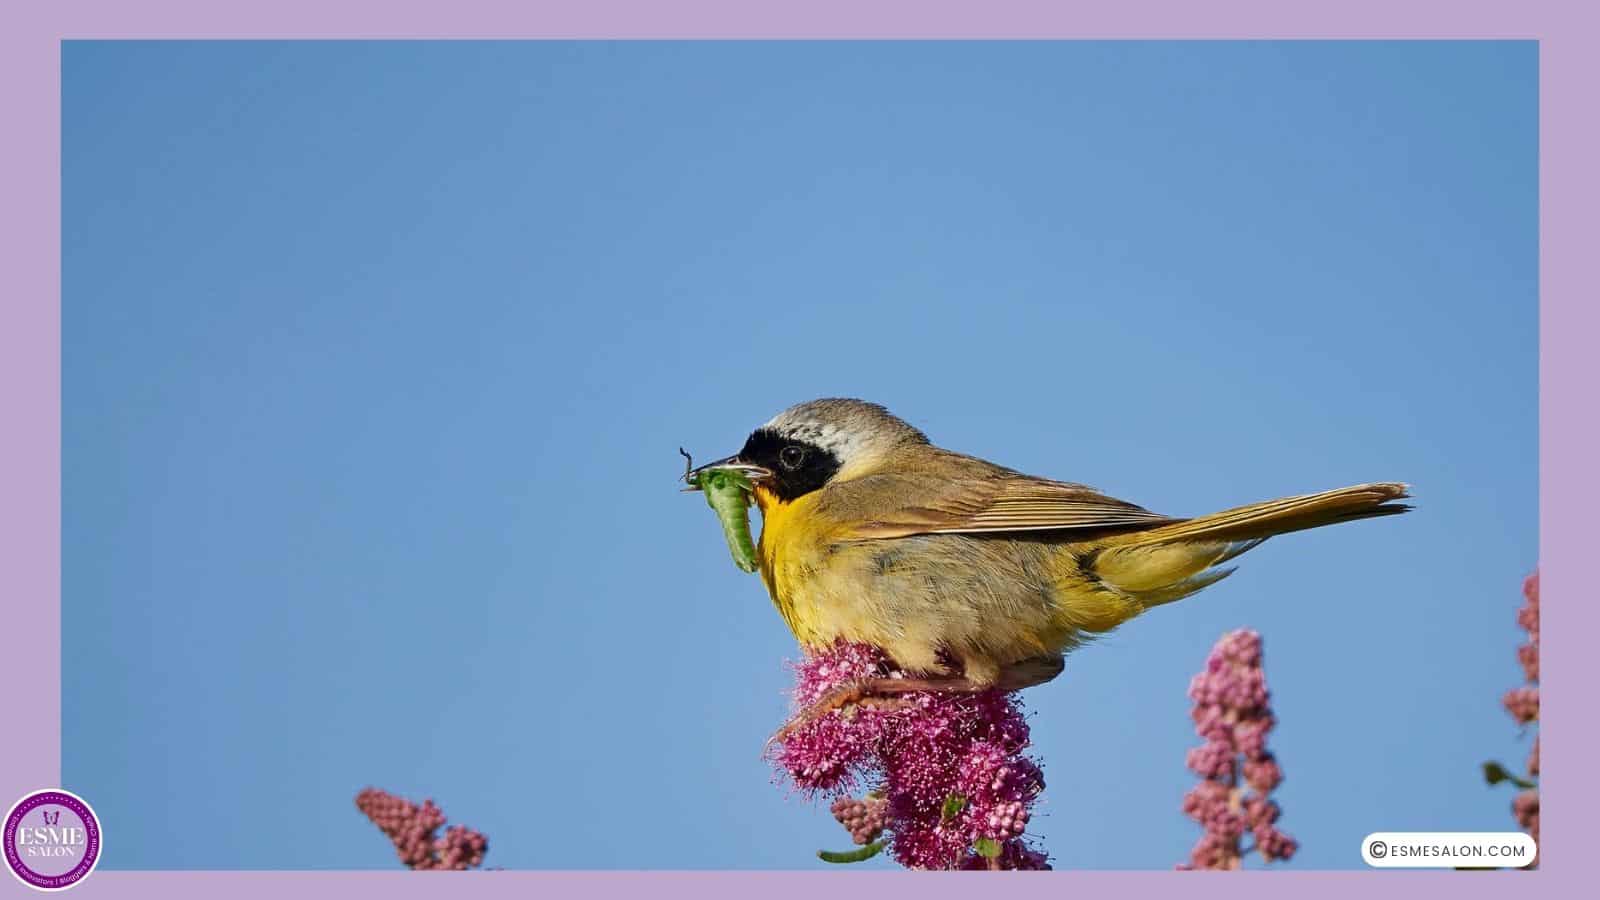 an image of a Common Yellowthroat sitting on a flower with a green worm in its beak